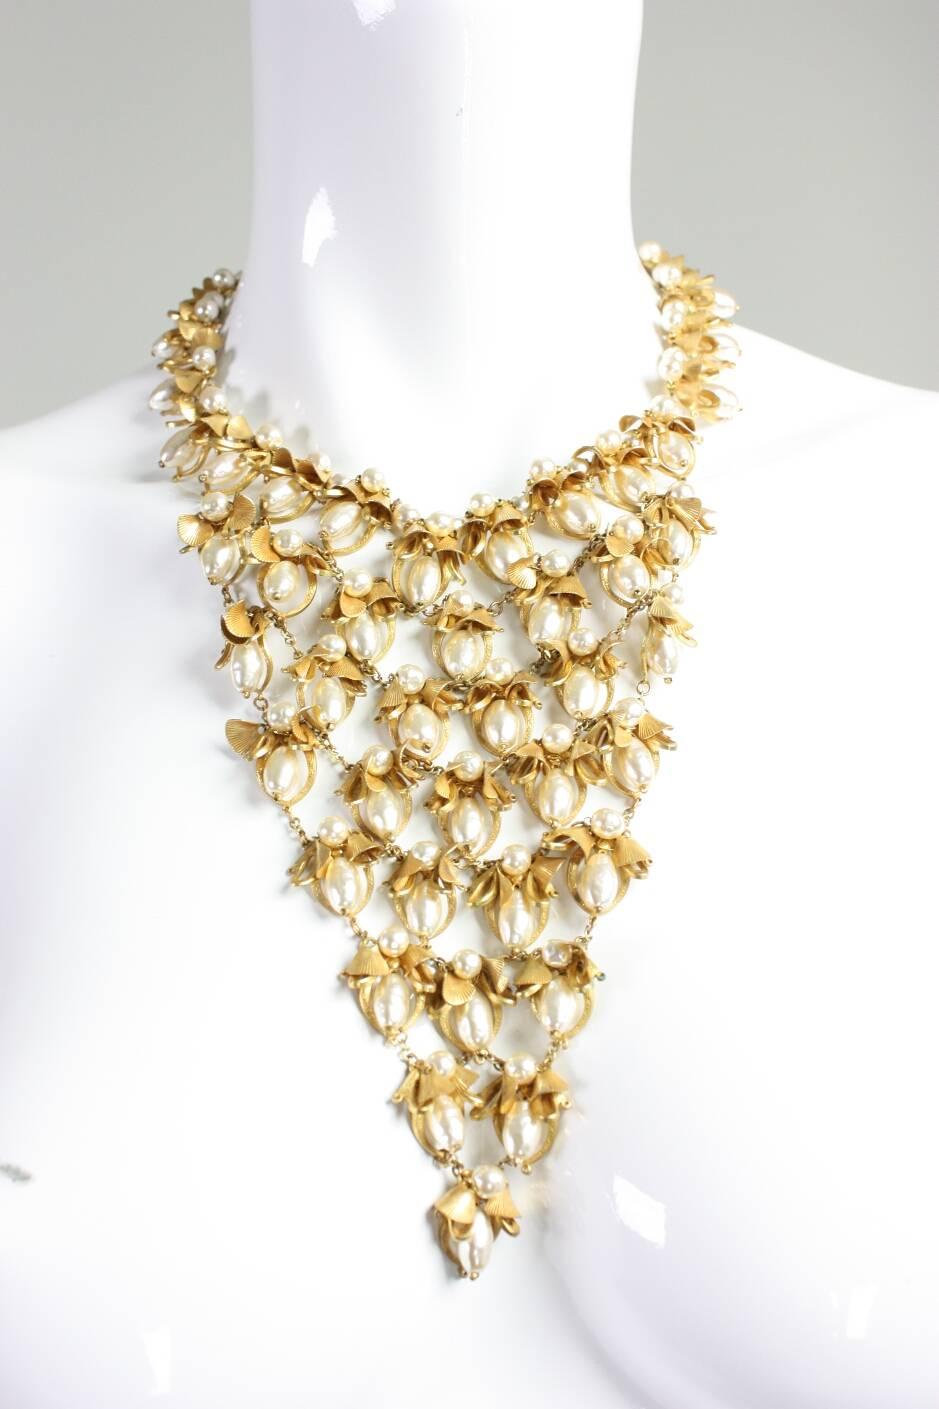 Vintage necklace from Miriam Haskell likely dates from the 1950's to the 1960's and is made of gold-toned metal with faux fresh water pearls.  Signature filigree round box clasp.

Measurements-

Center front: 6 3/4"
Circumference: 17"